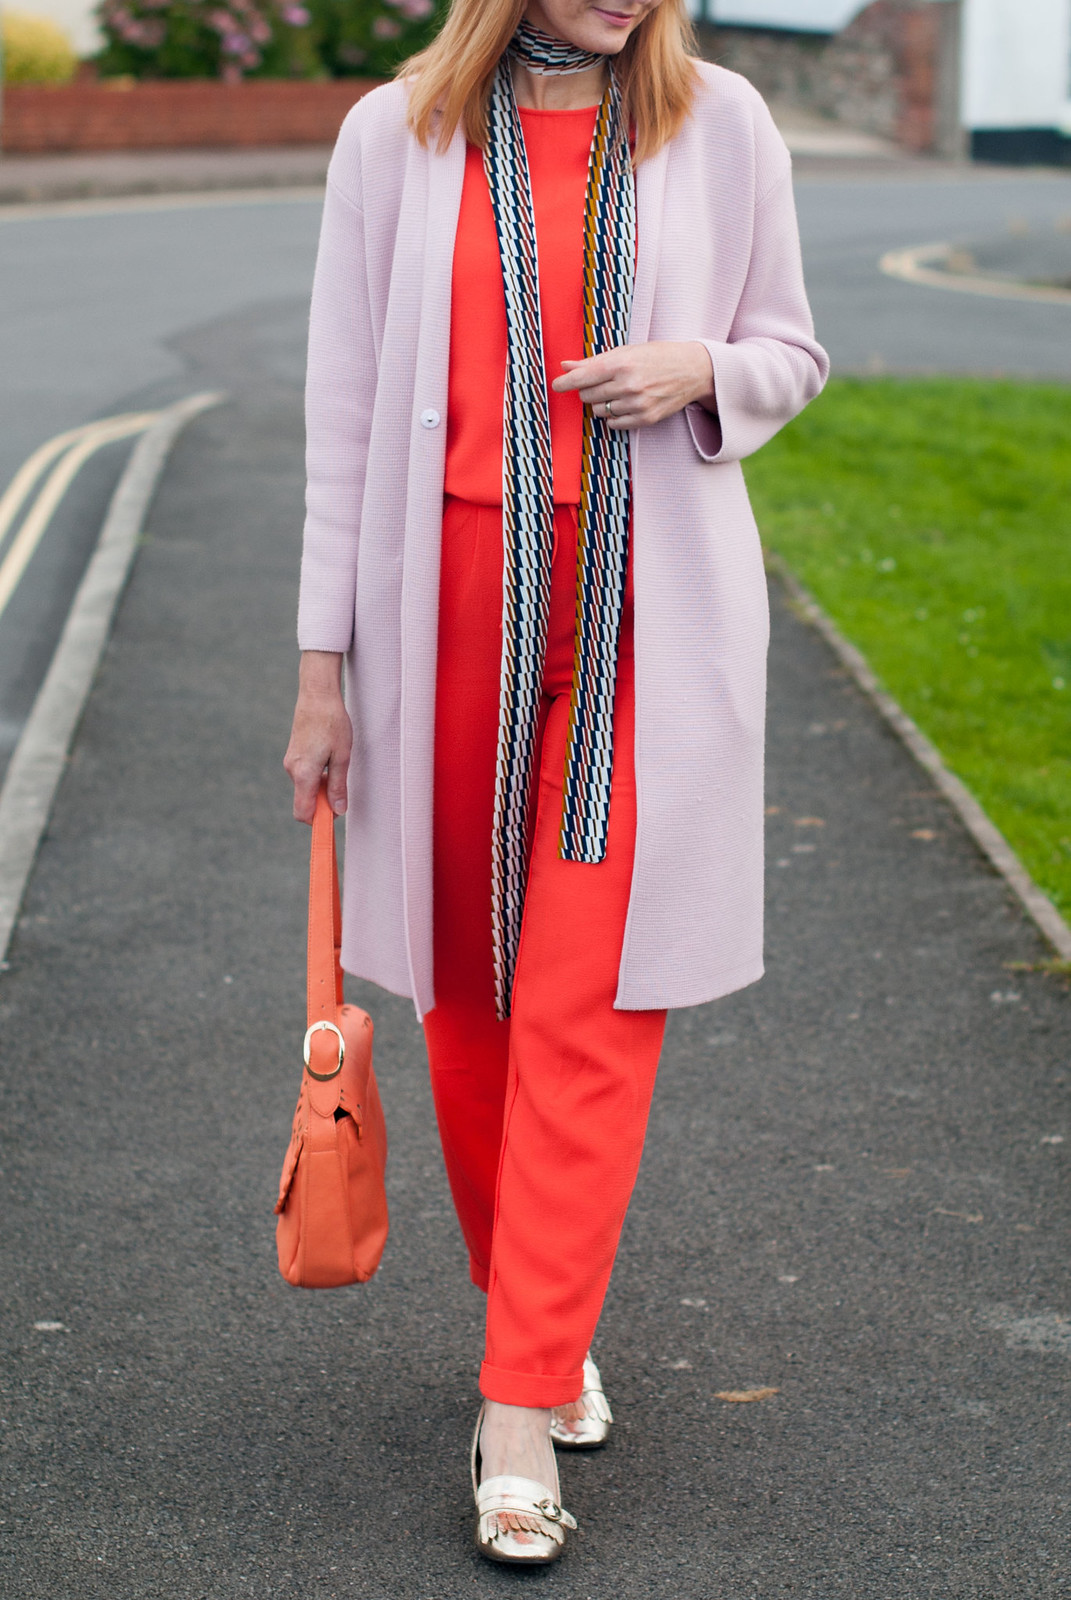 Ways to wear an orange jumpsuit: With a longline pink coatigan, metallic gold block heel loafers, 70s style skinny scarf | Not Dressed As Lamb, over 40 style